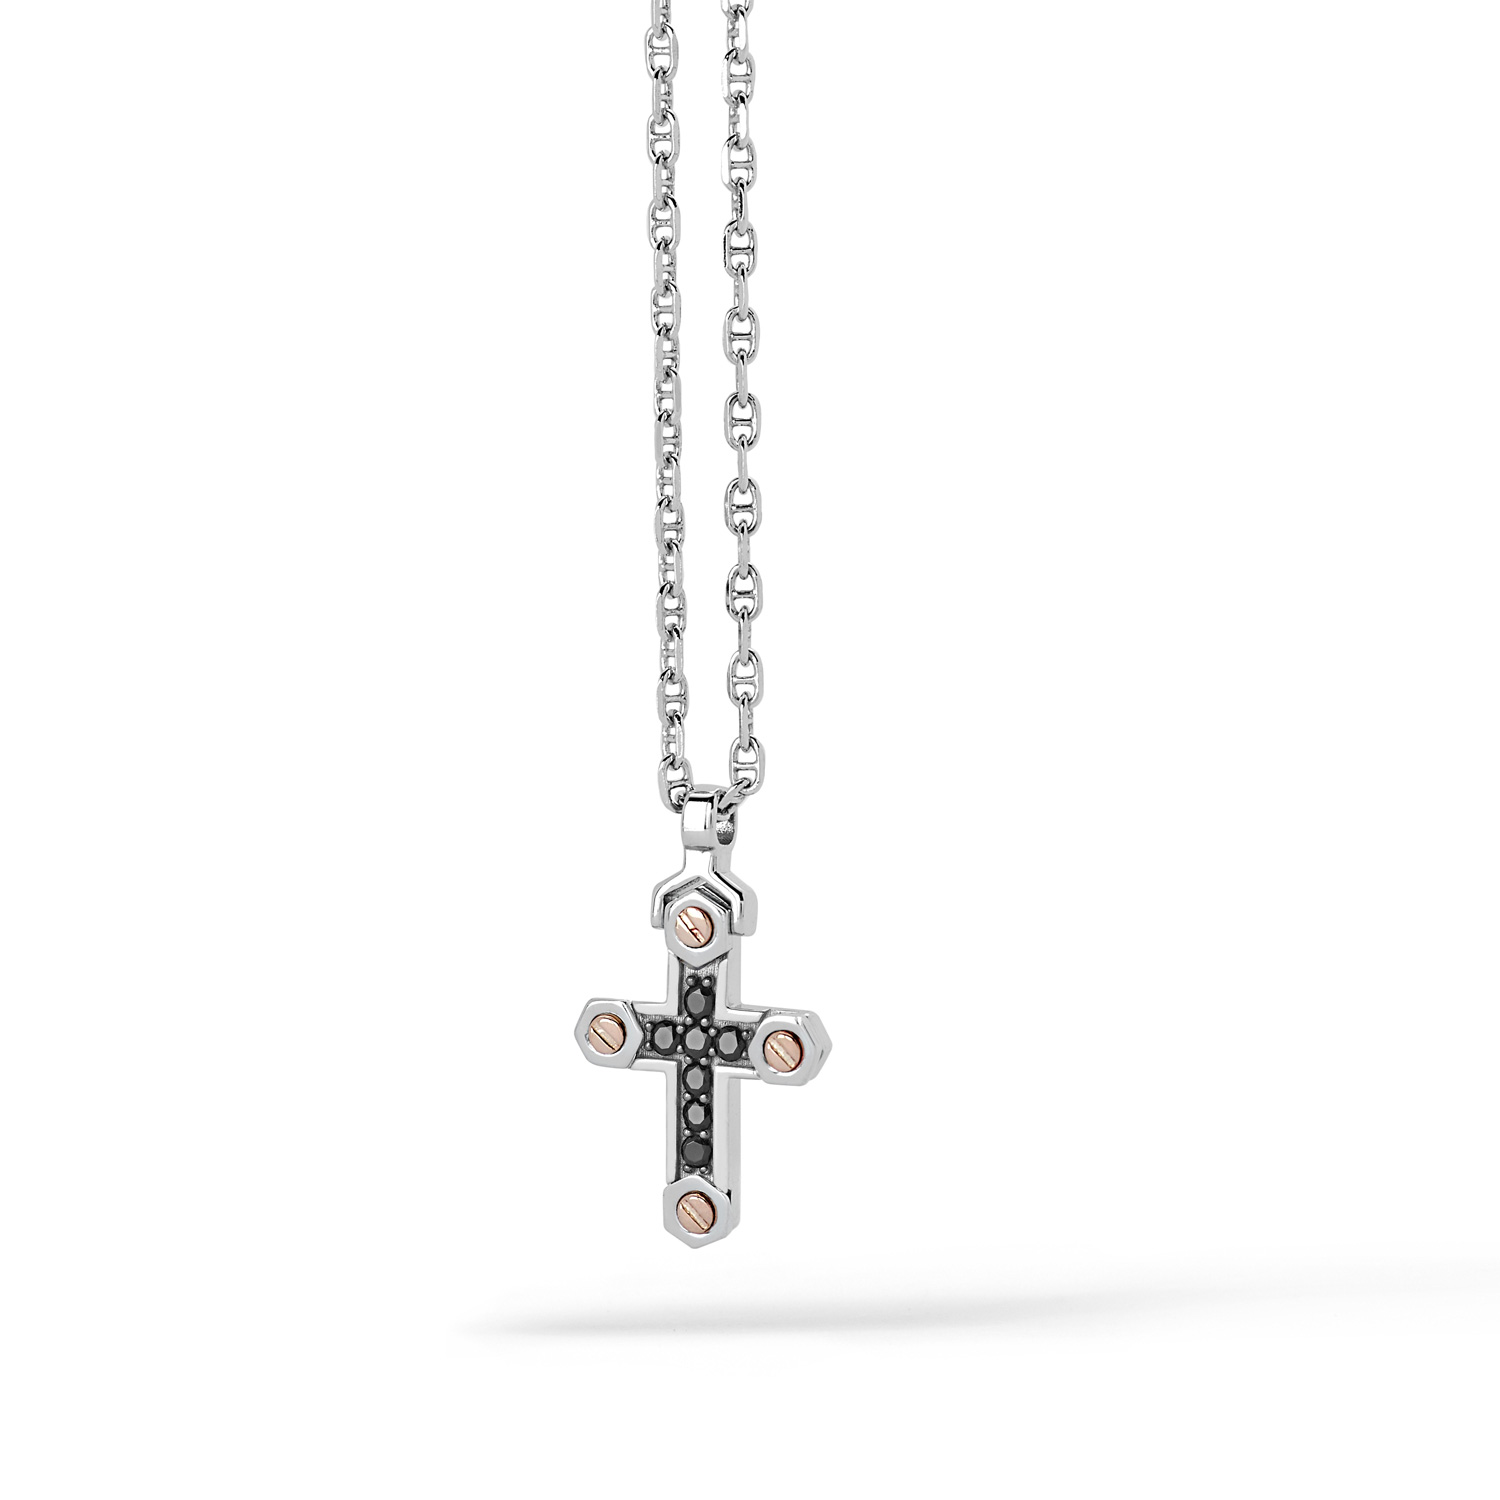 Comete Gioielli Necklace with Cross in Silver and Black Zircons